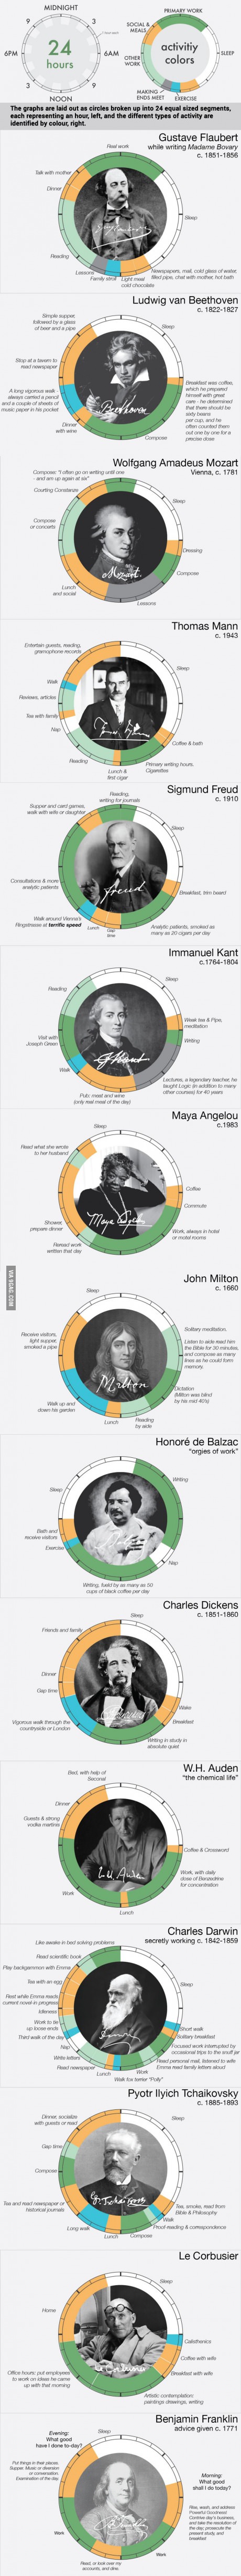 15 of history's biggest thinkers and how they spent their time